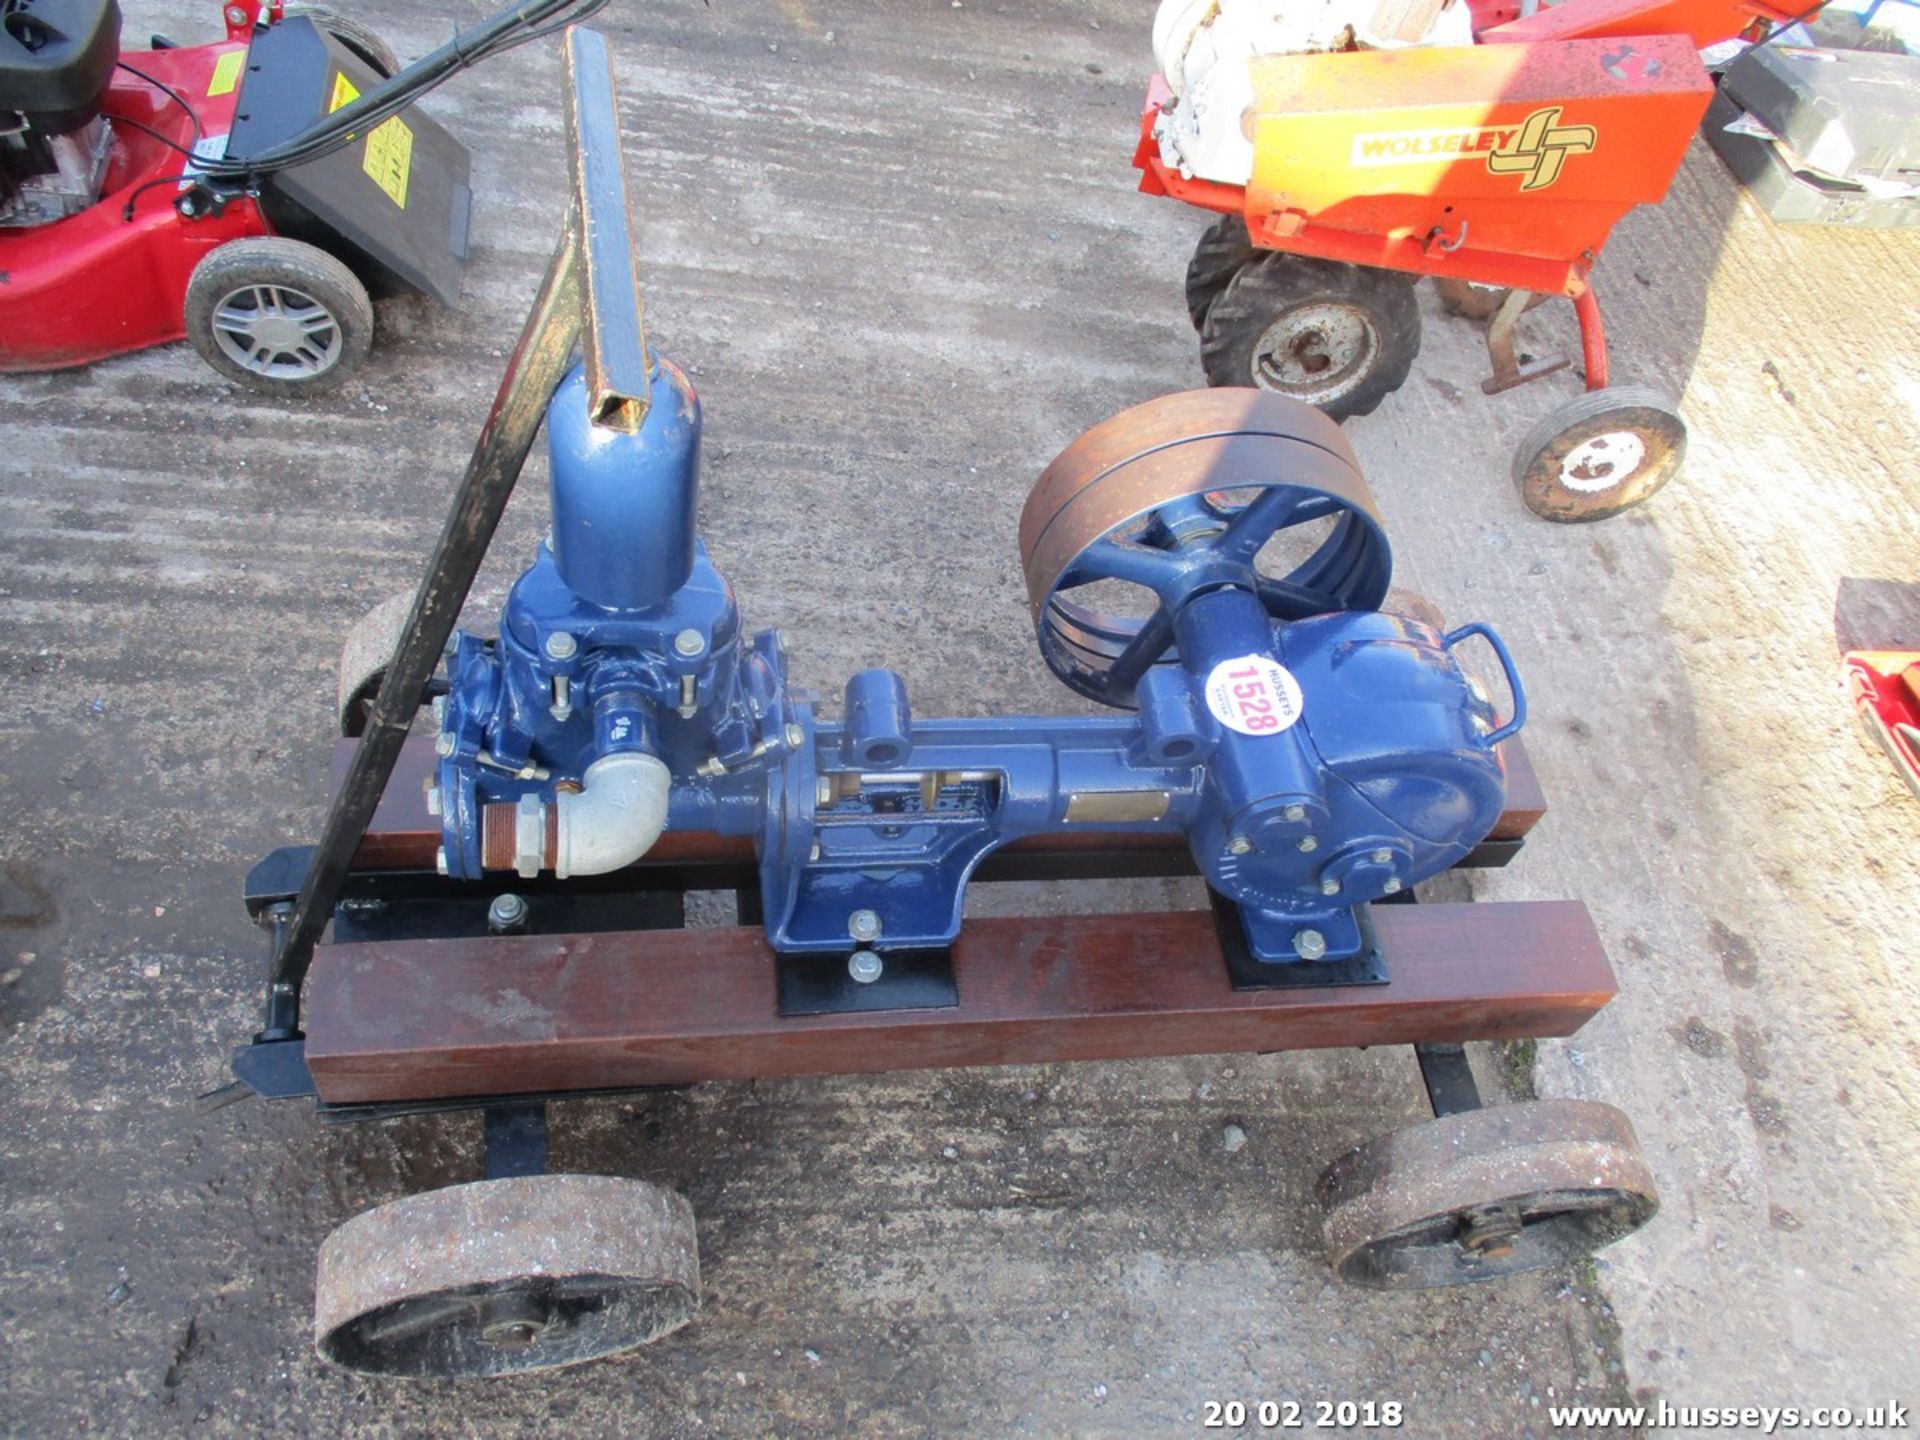 DBL WATER PUMP TO RUN OFF TRACTOR OR GENERATOR